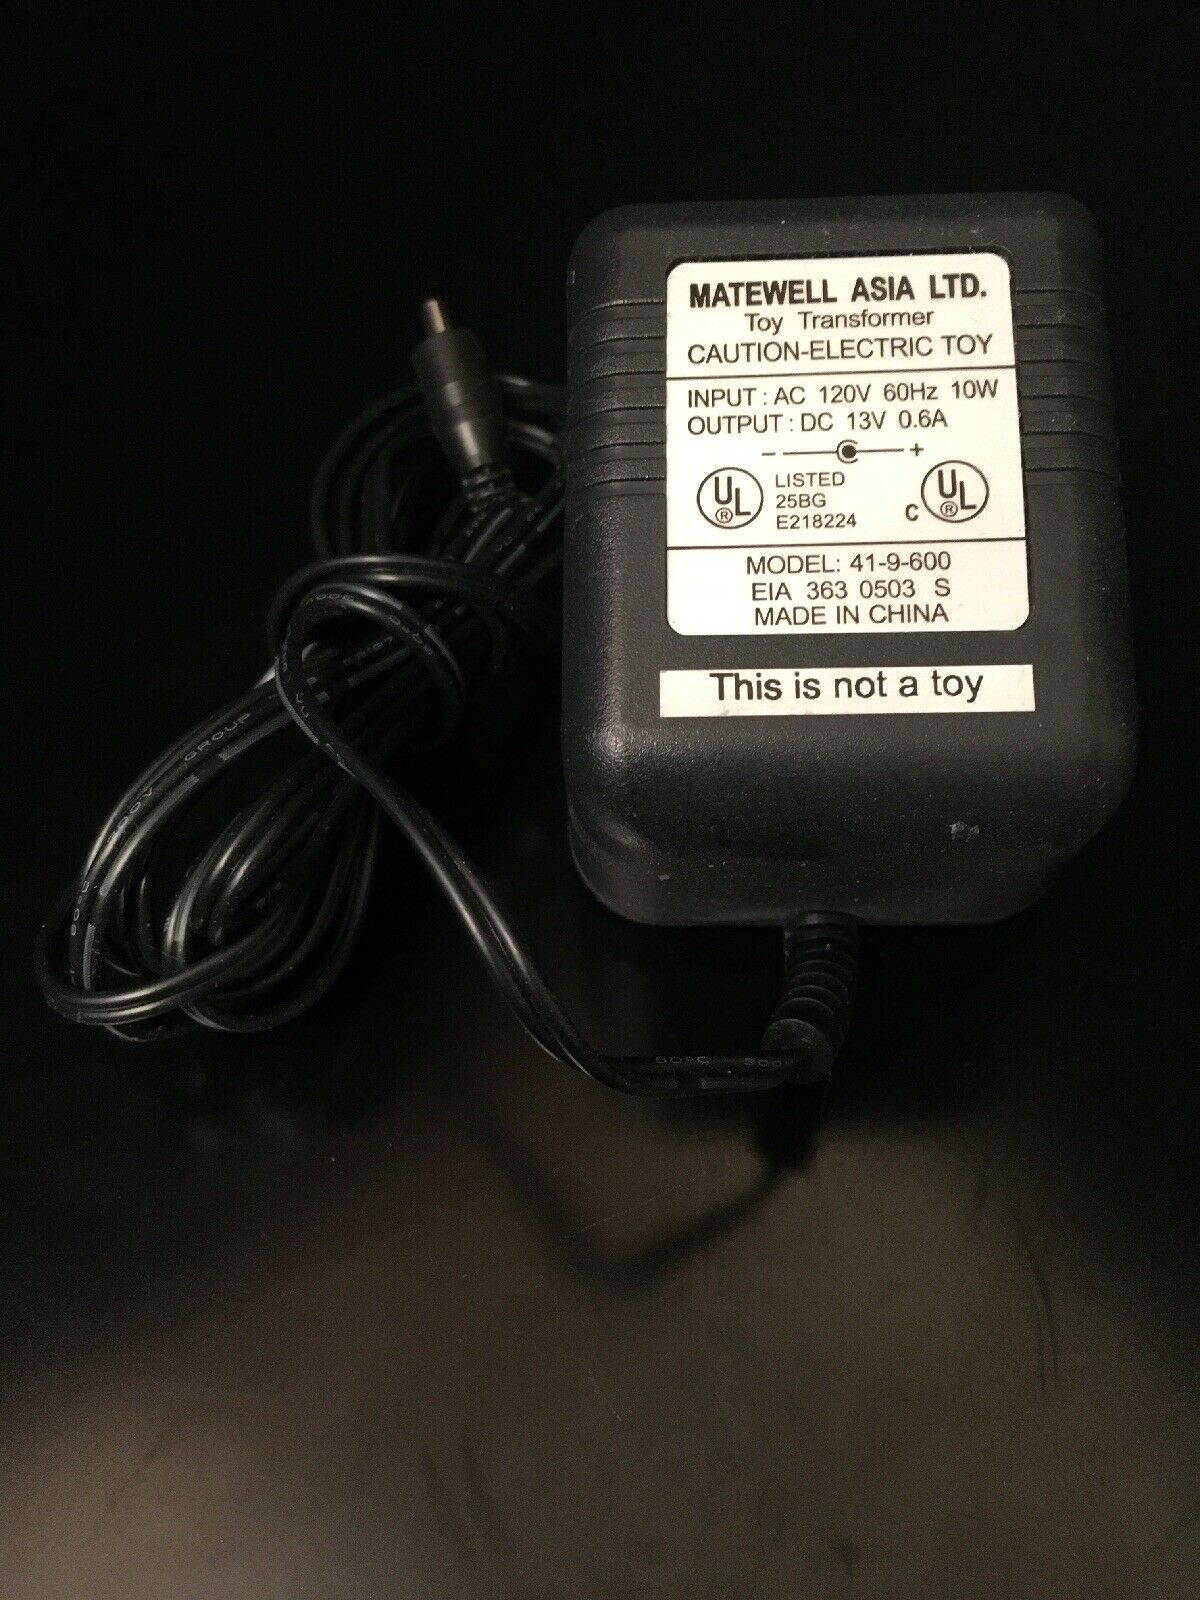 Matewell Asia Ltd. Toy Transformer Power Supply AC Adapter 41-9-600 Brand: Matewell Asia Ltd. MPN: 41-9-600 Model: - Click Image to Close